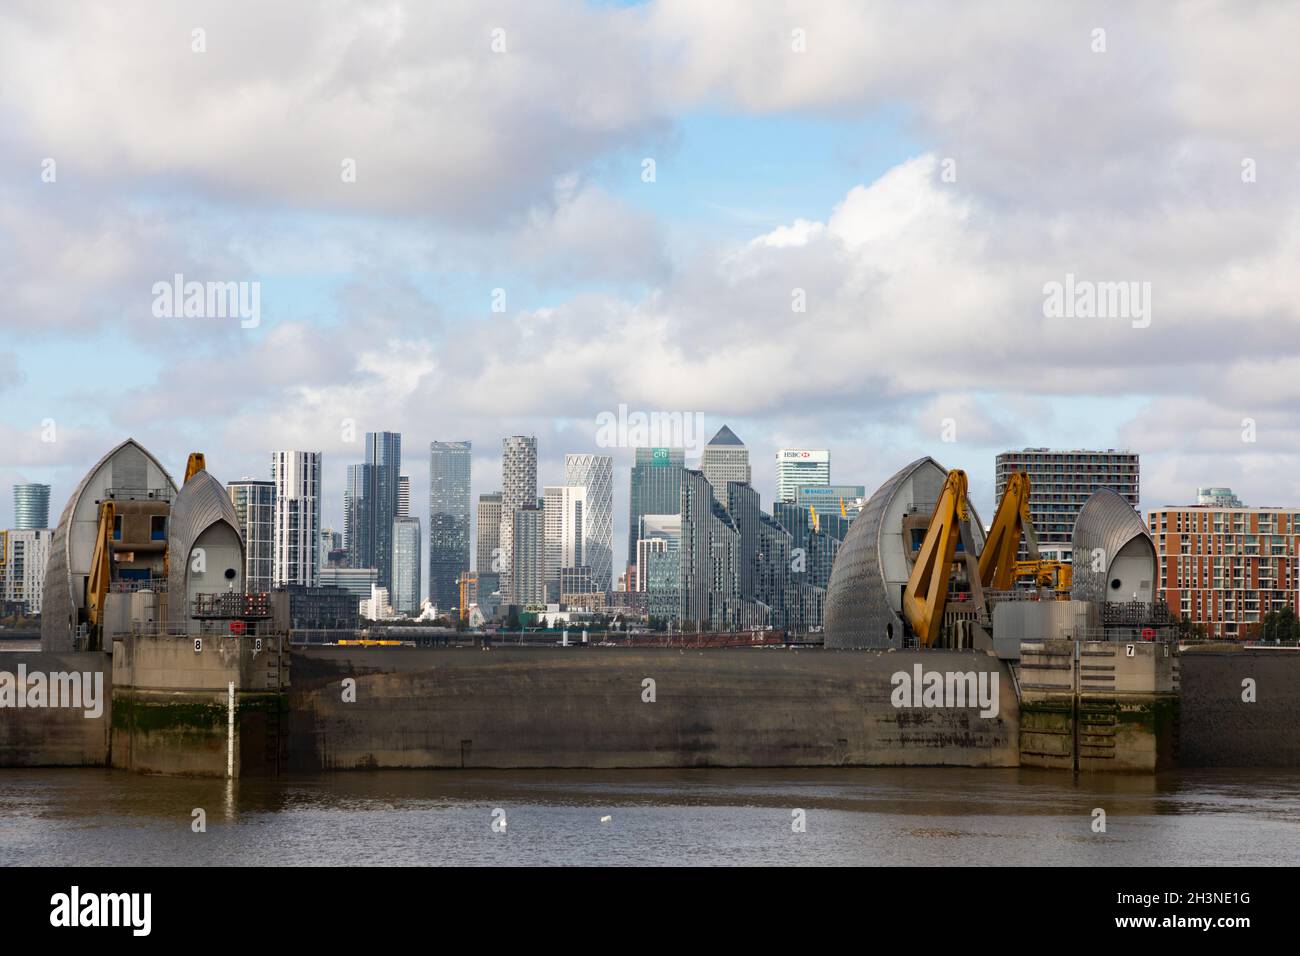 A view of canary Wharf, London protected by the Thames Barrier. UK, October 2021. Stock Photo